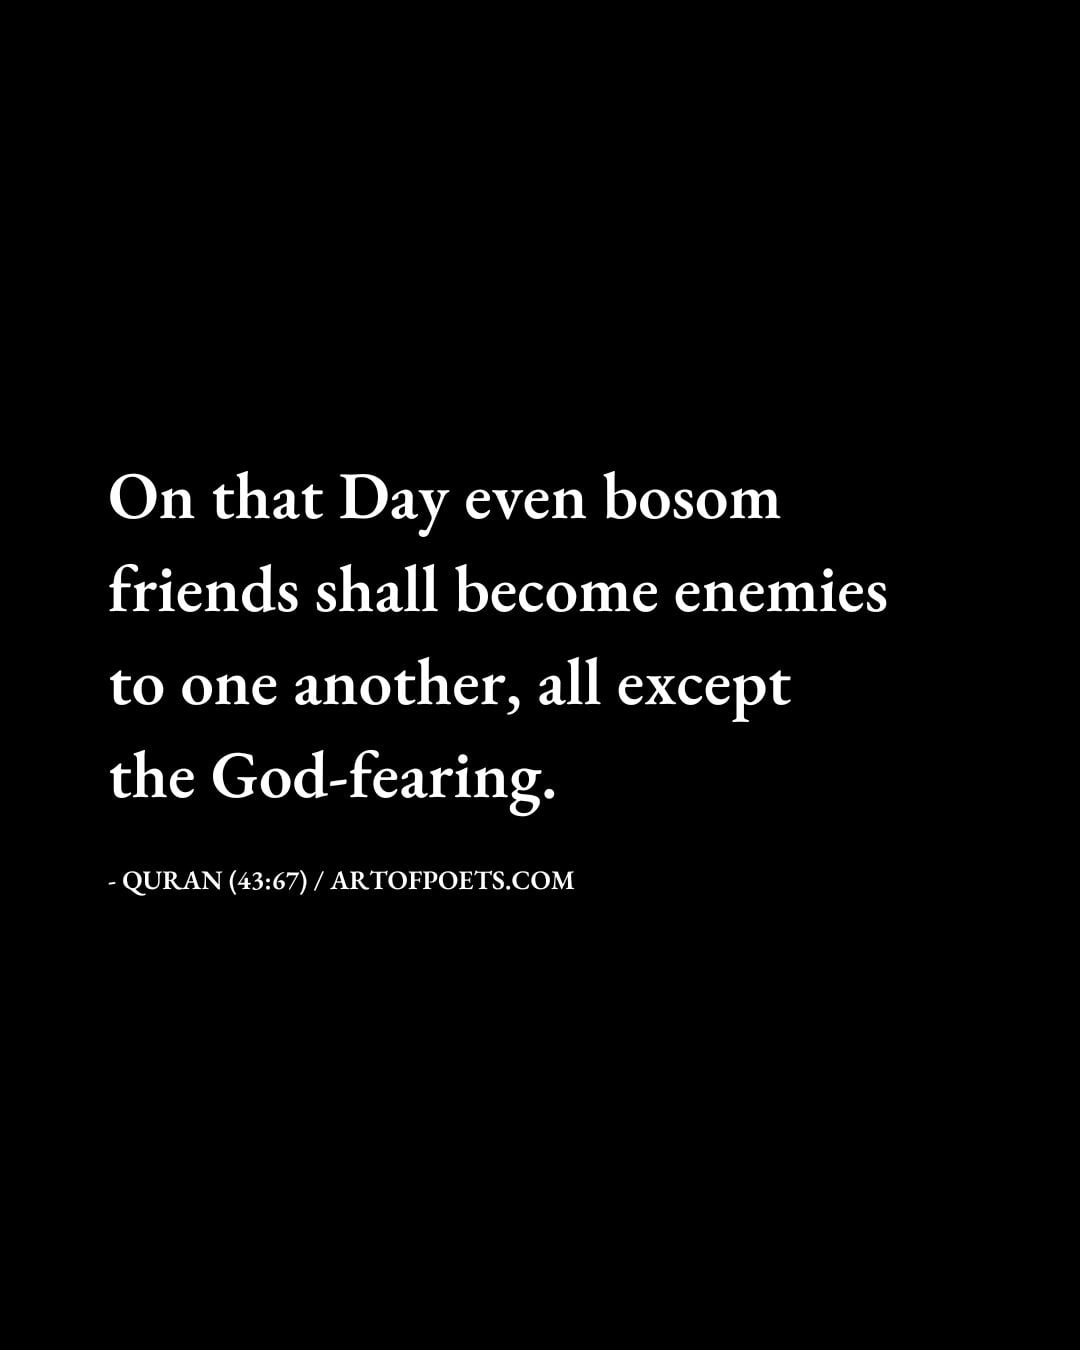 On that Day even bosom friends shall become enemies to one another all except the God fearing